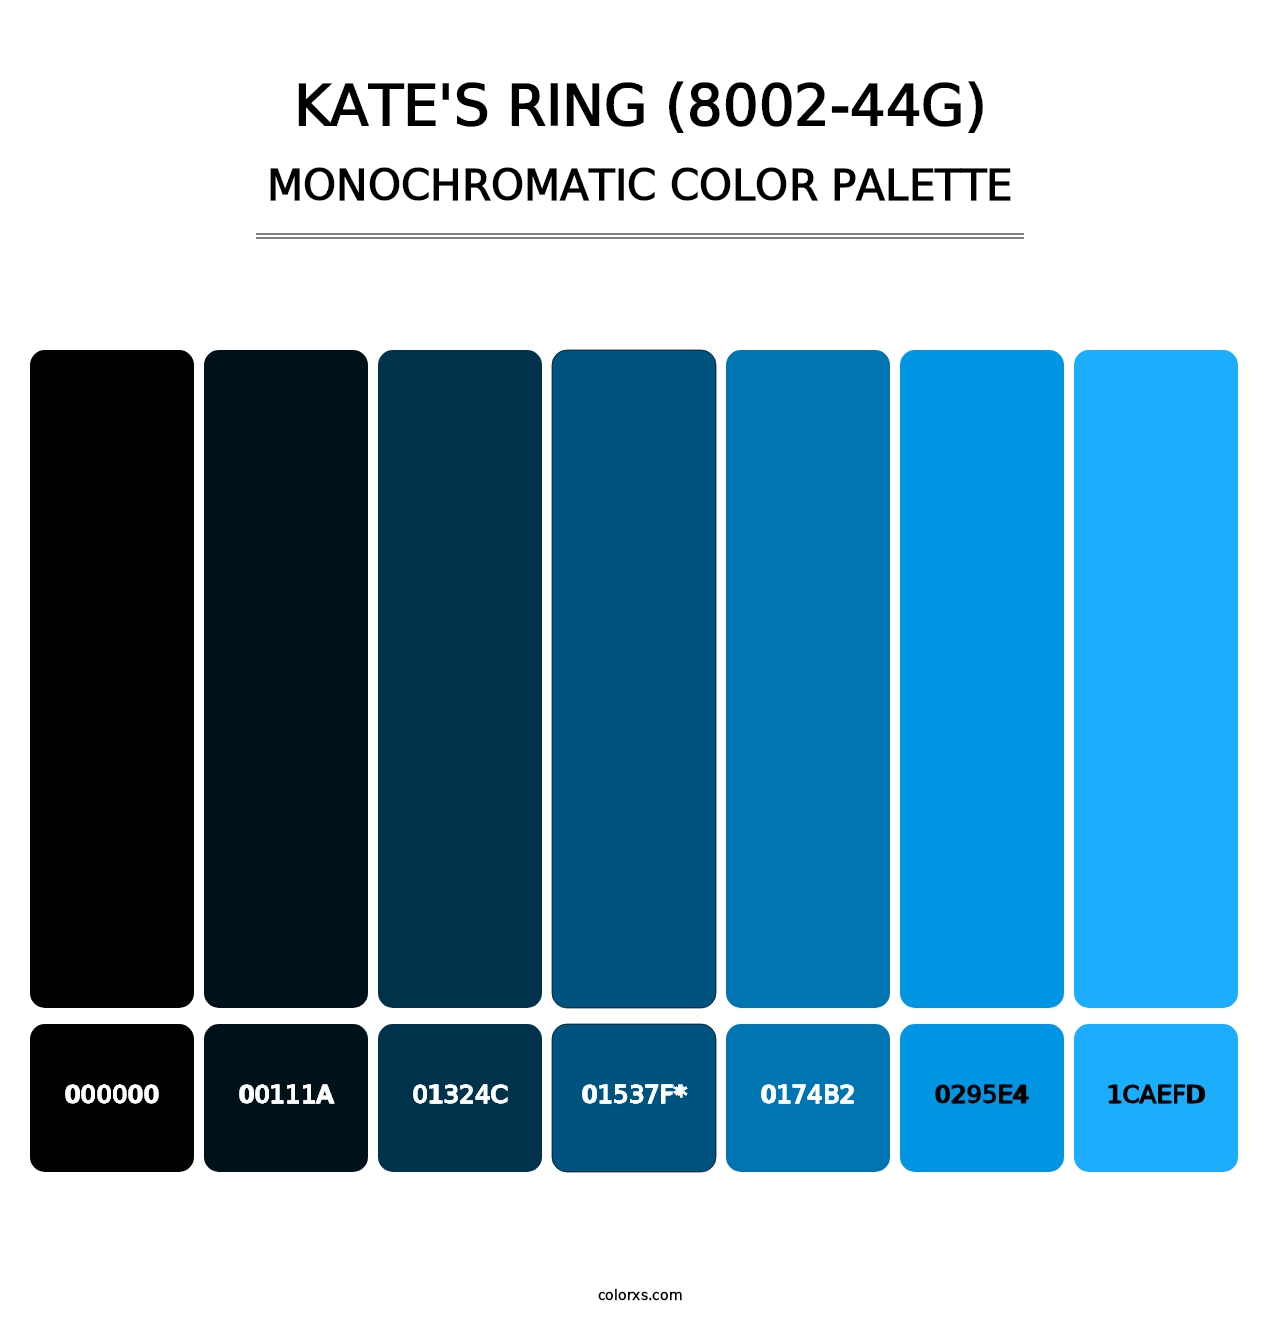 Kate's Ring (8002-44G) - Monochromatic Color Palette